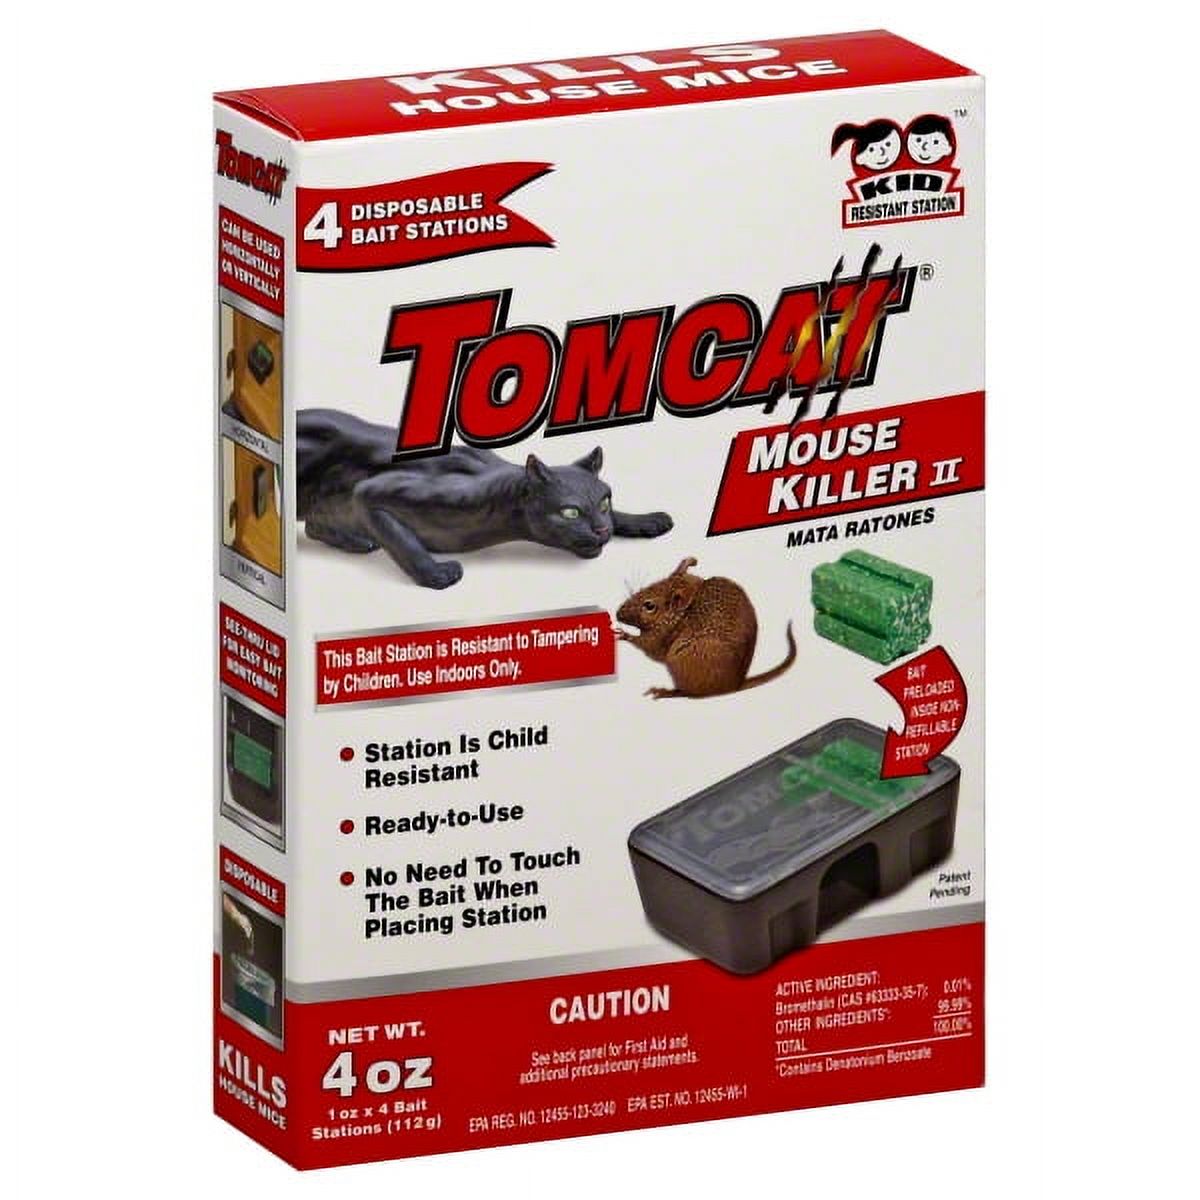 Tomcat Mouse Killer II Disposable Bait Stations, 4 count - image 1 of 3